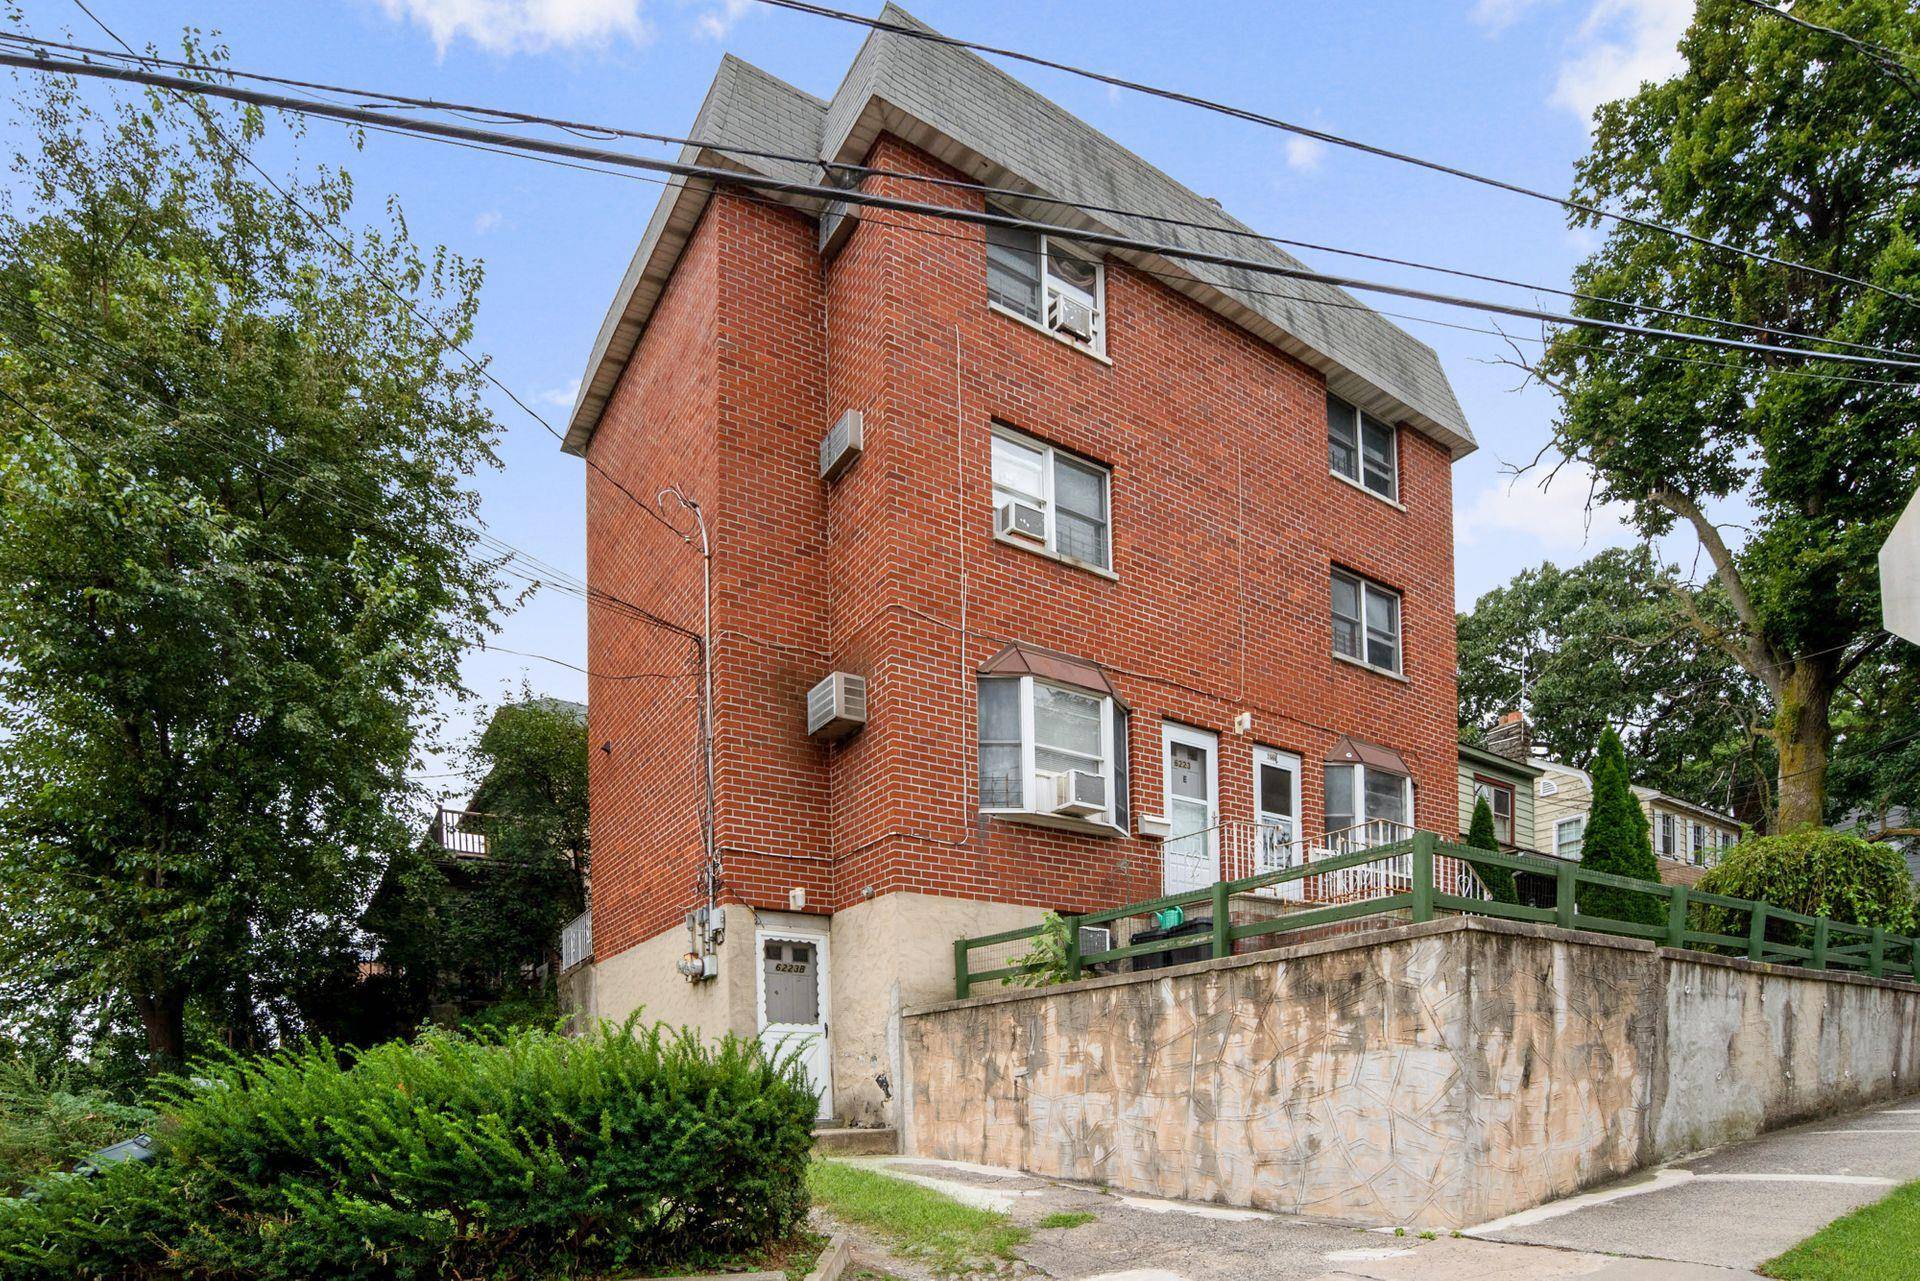 Large brick two family house on corner lot features two triplex apartments each with three bedrooms, two full and one half bath and open kitchen, dining and living room.